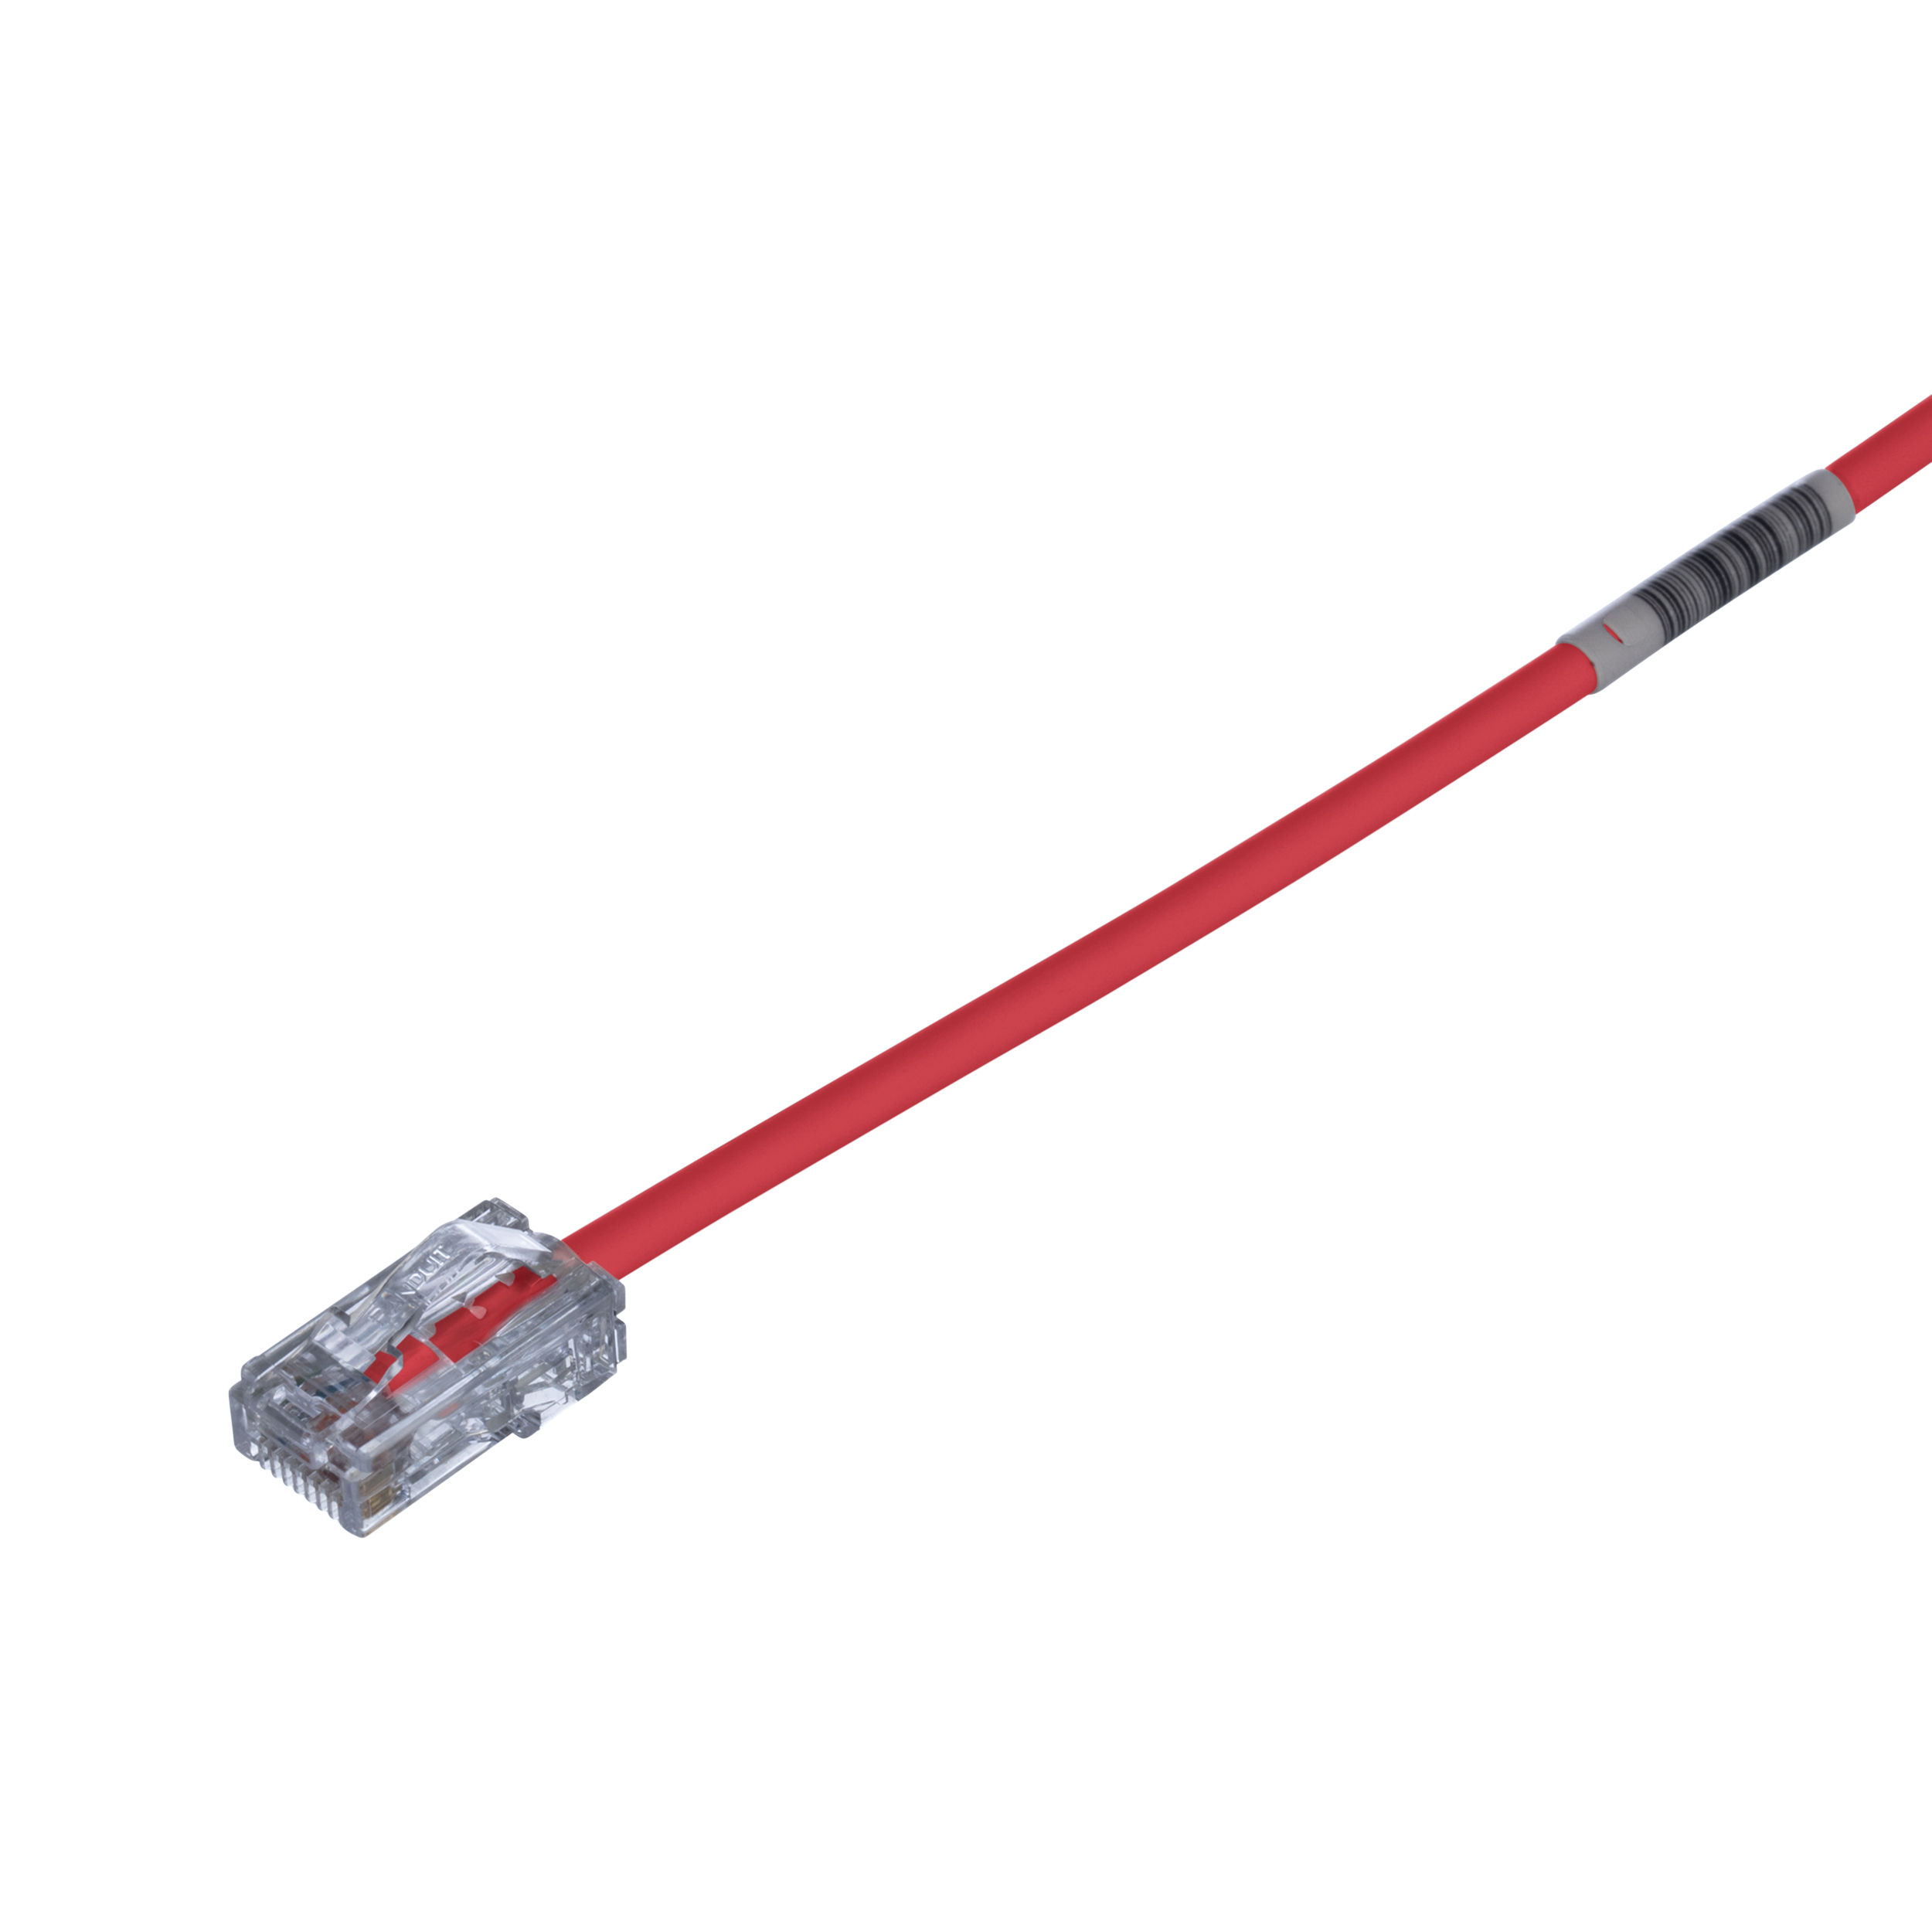 Cat 5e 28 AWG UTP Copper Patch Cord, 9 ft, Red